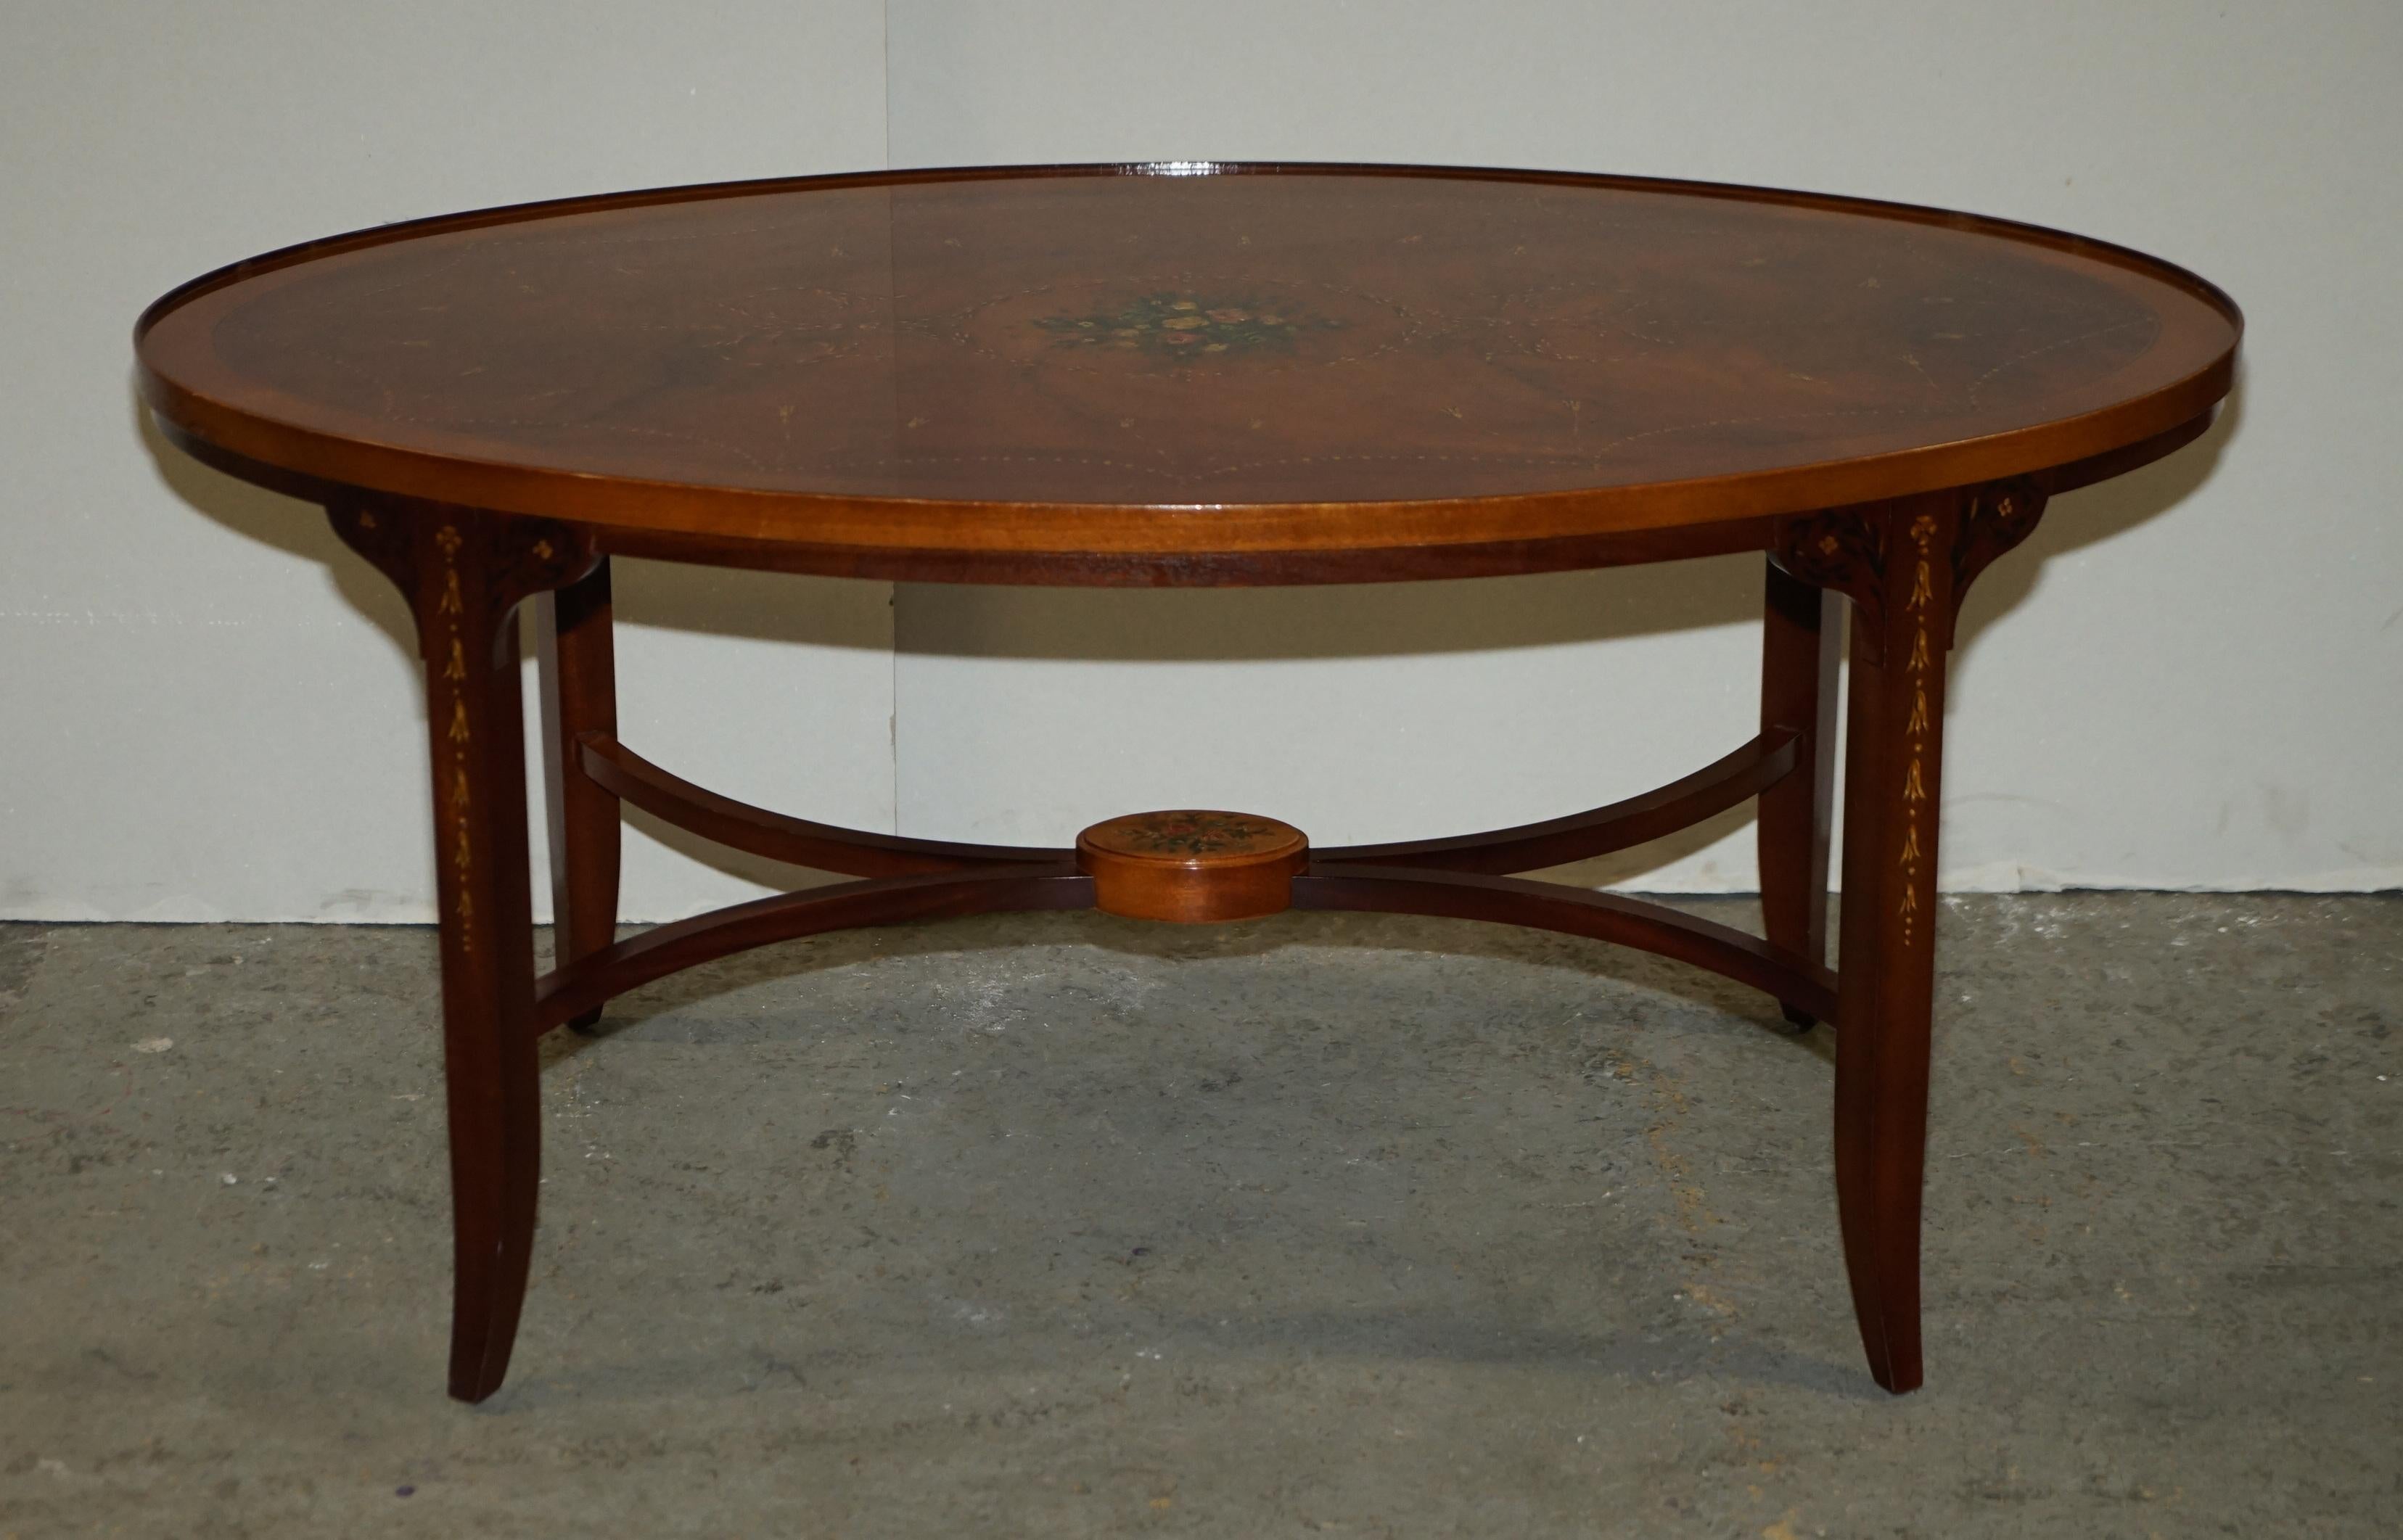 Sheraton Stunning Oval Hardwood Coffee Table With Splayed Legs Decorative Floral Detail